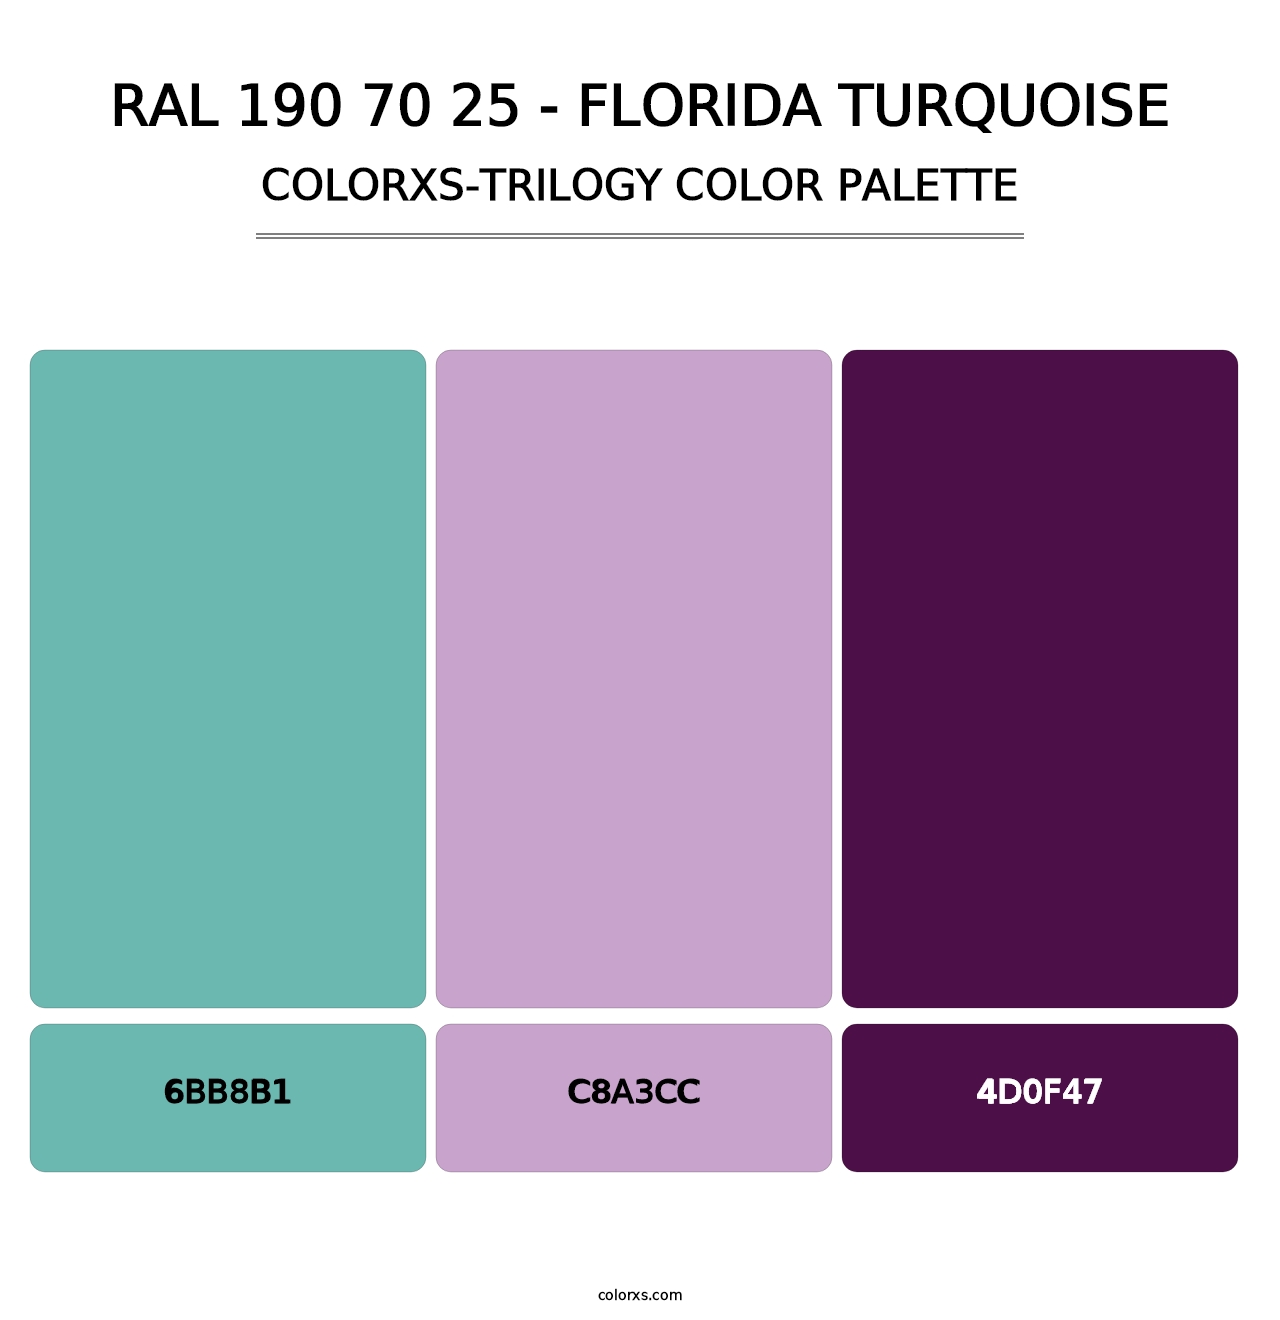 RAL 190 70 25 - Florida Turquoise - Colorxs Trilogy Palette